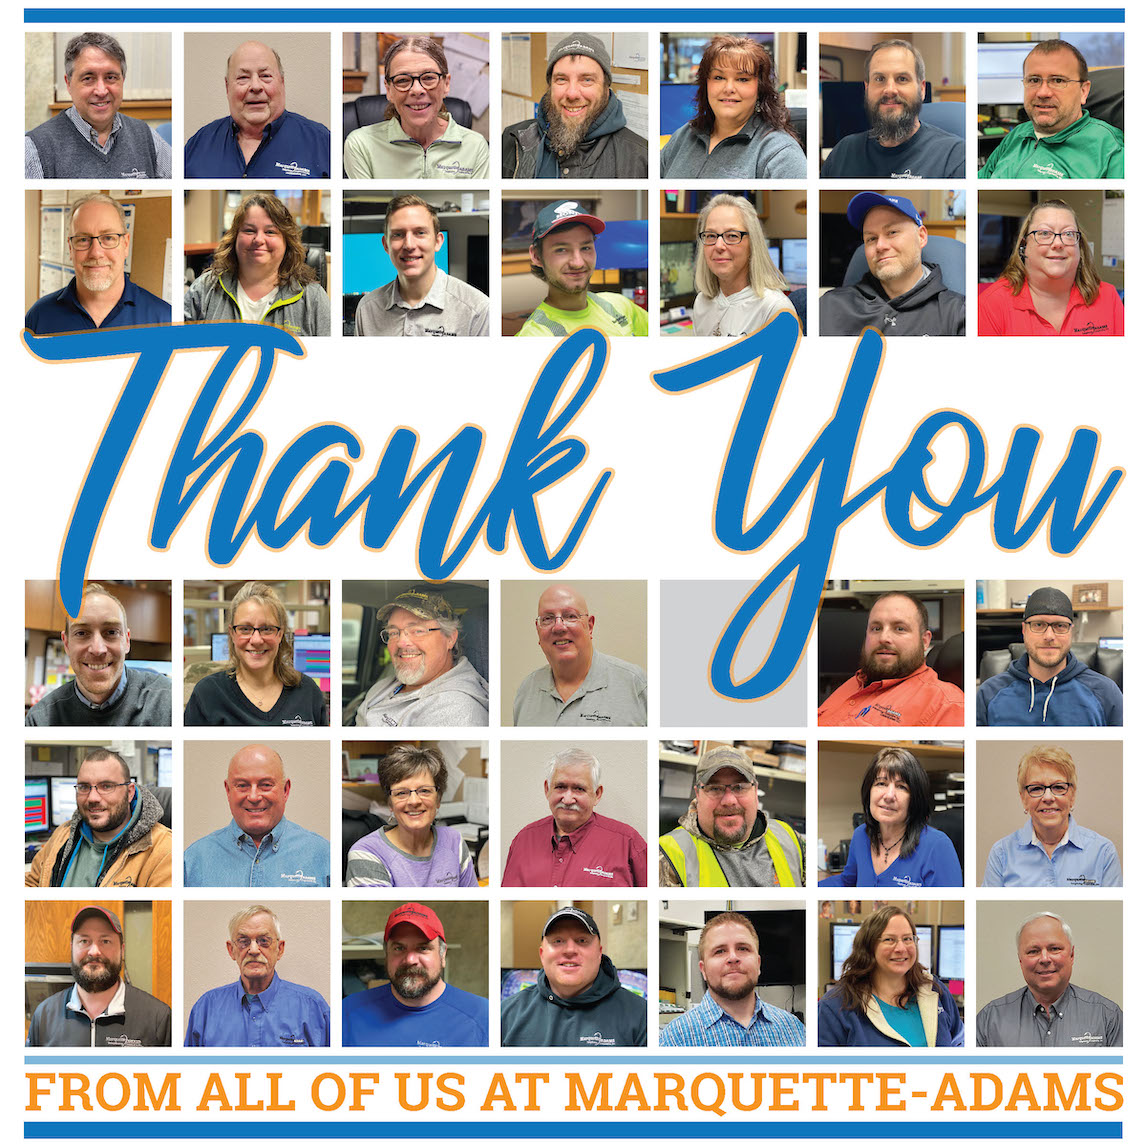 Thank You - Download Images to View